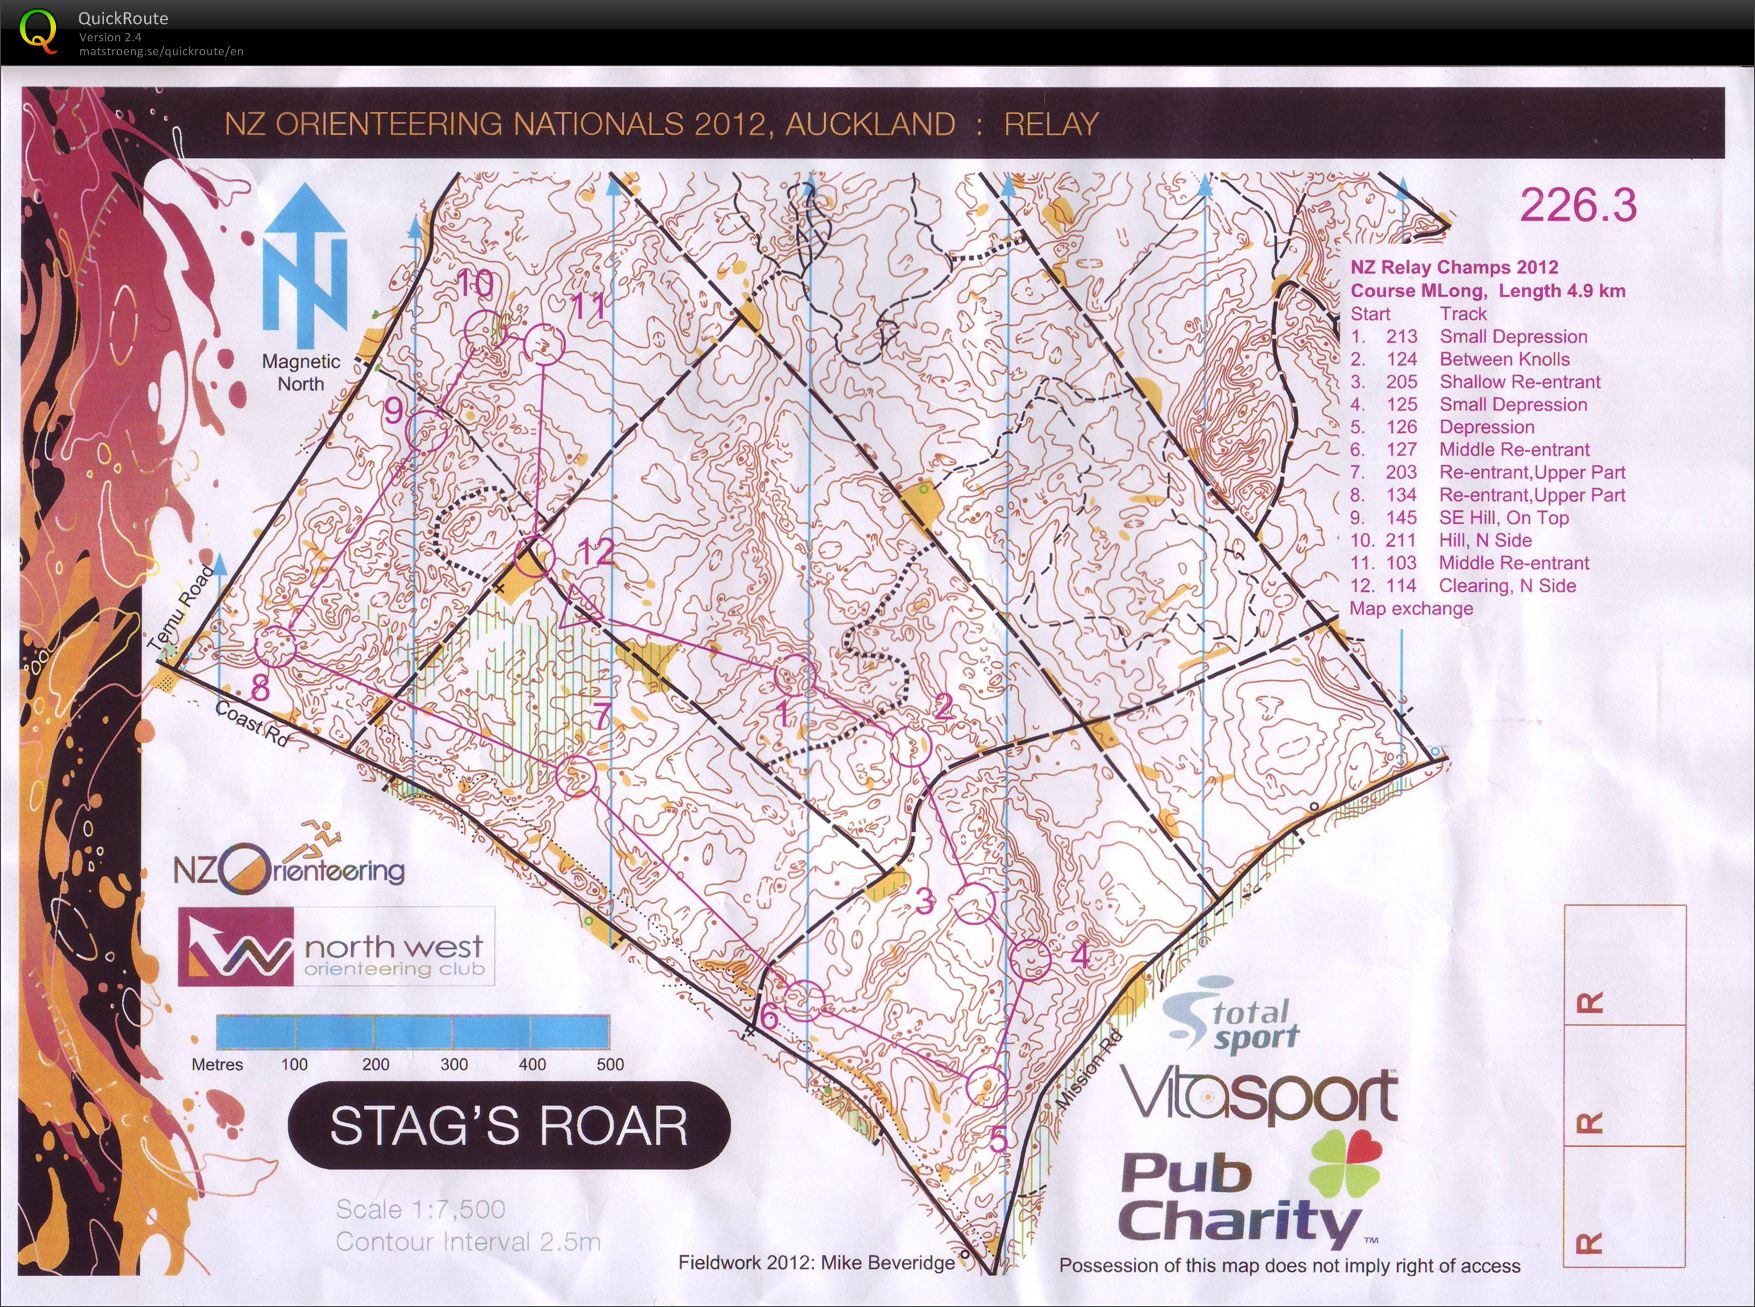 Nationals Relay, map 1 (08/04/2012)